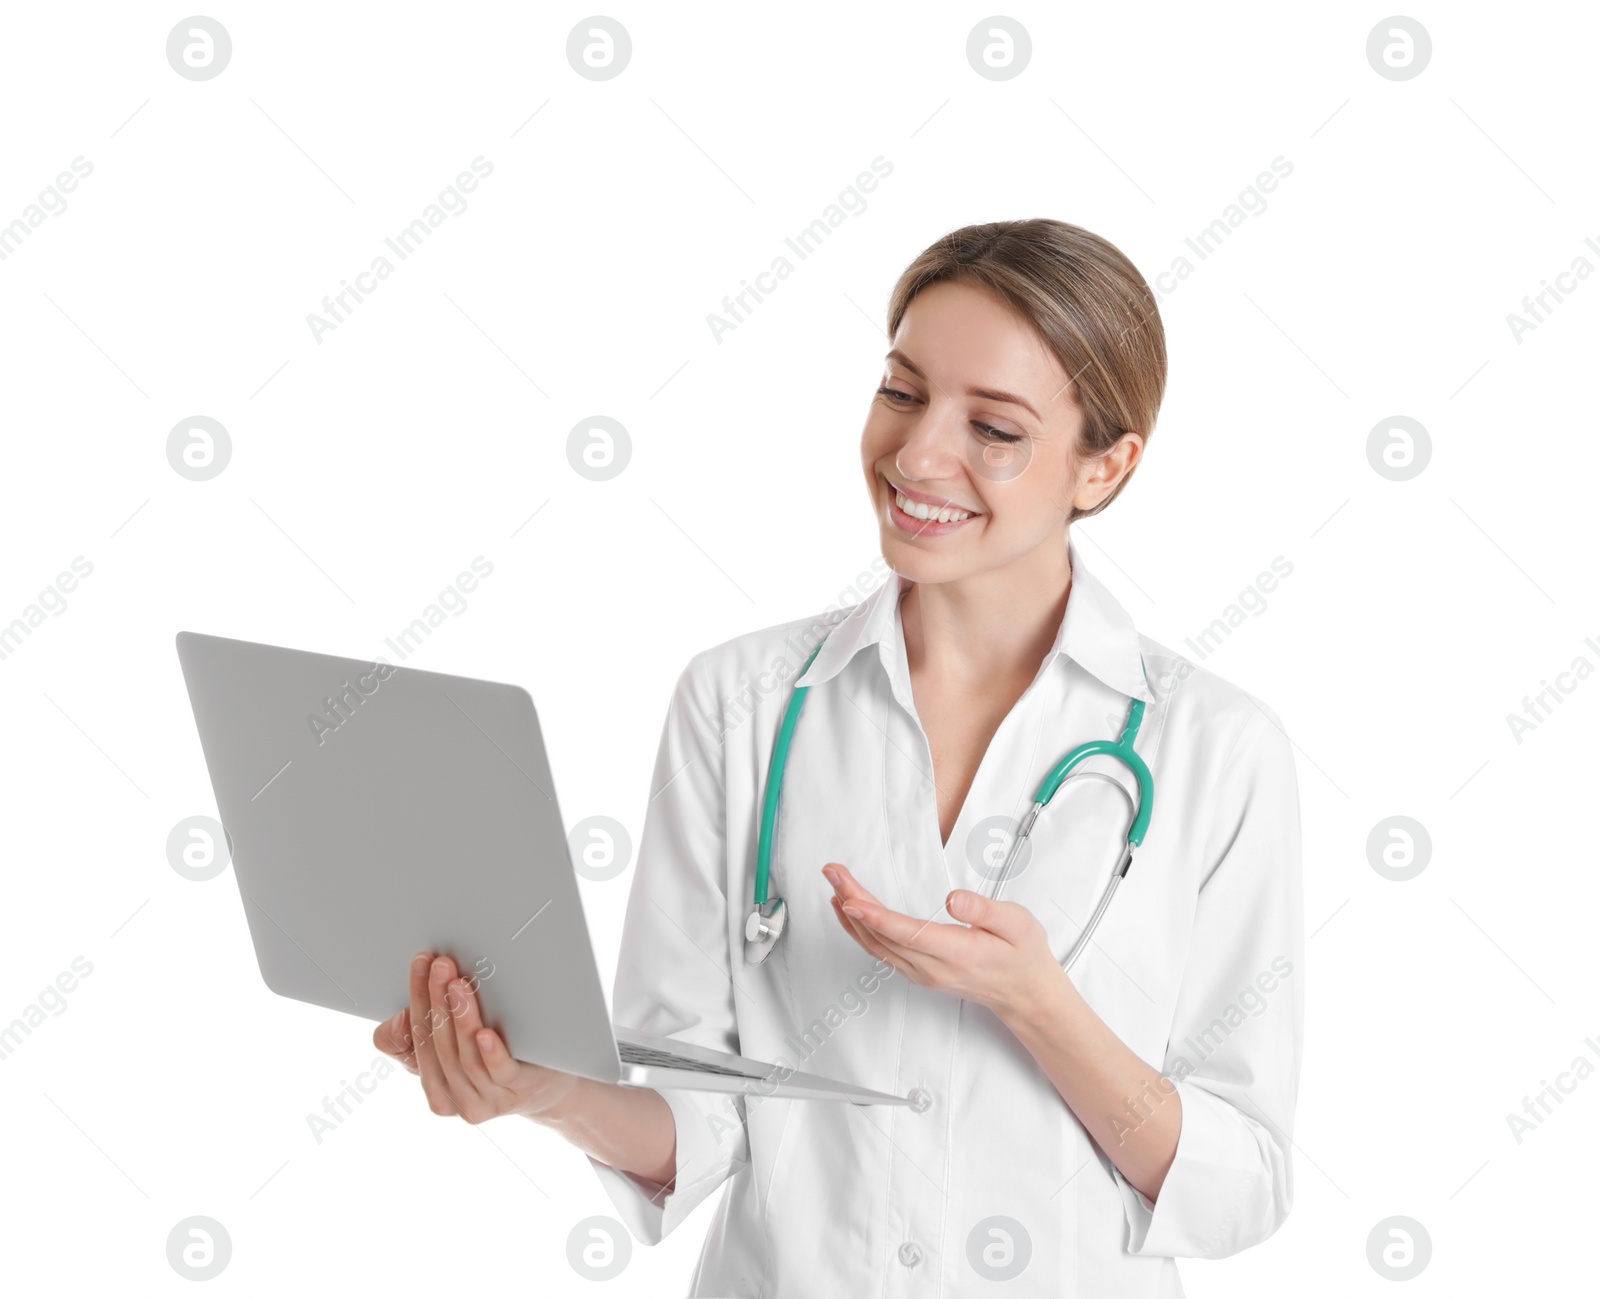 Photo of Female doctor using video chat on laptop against white background